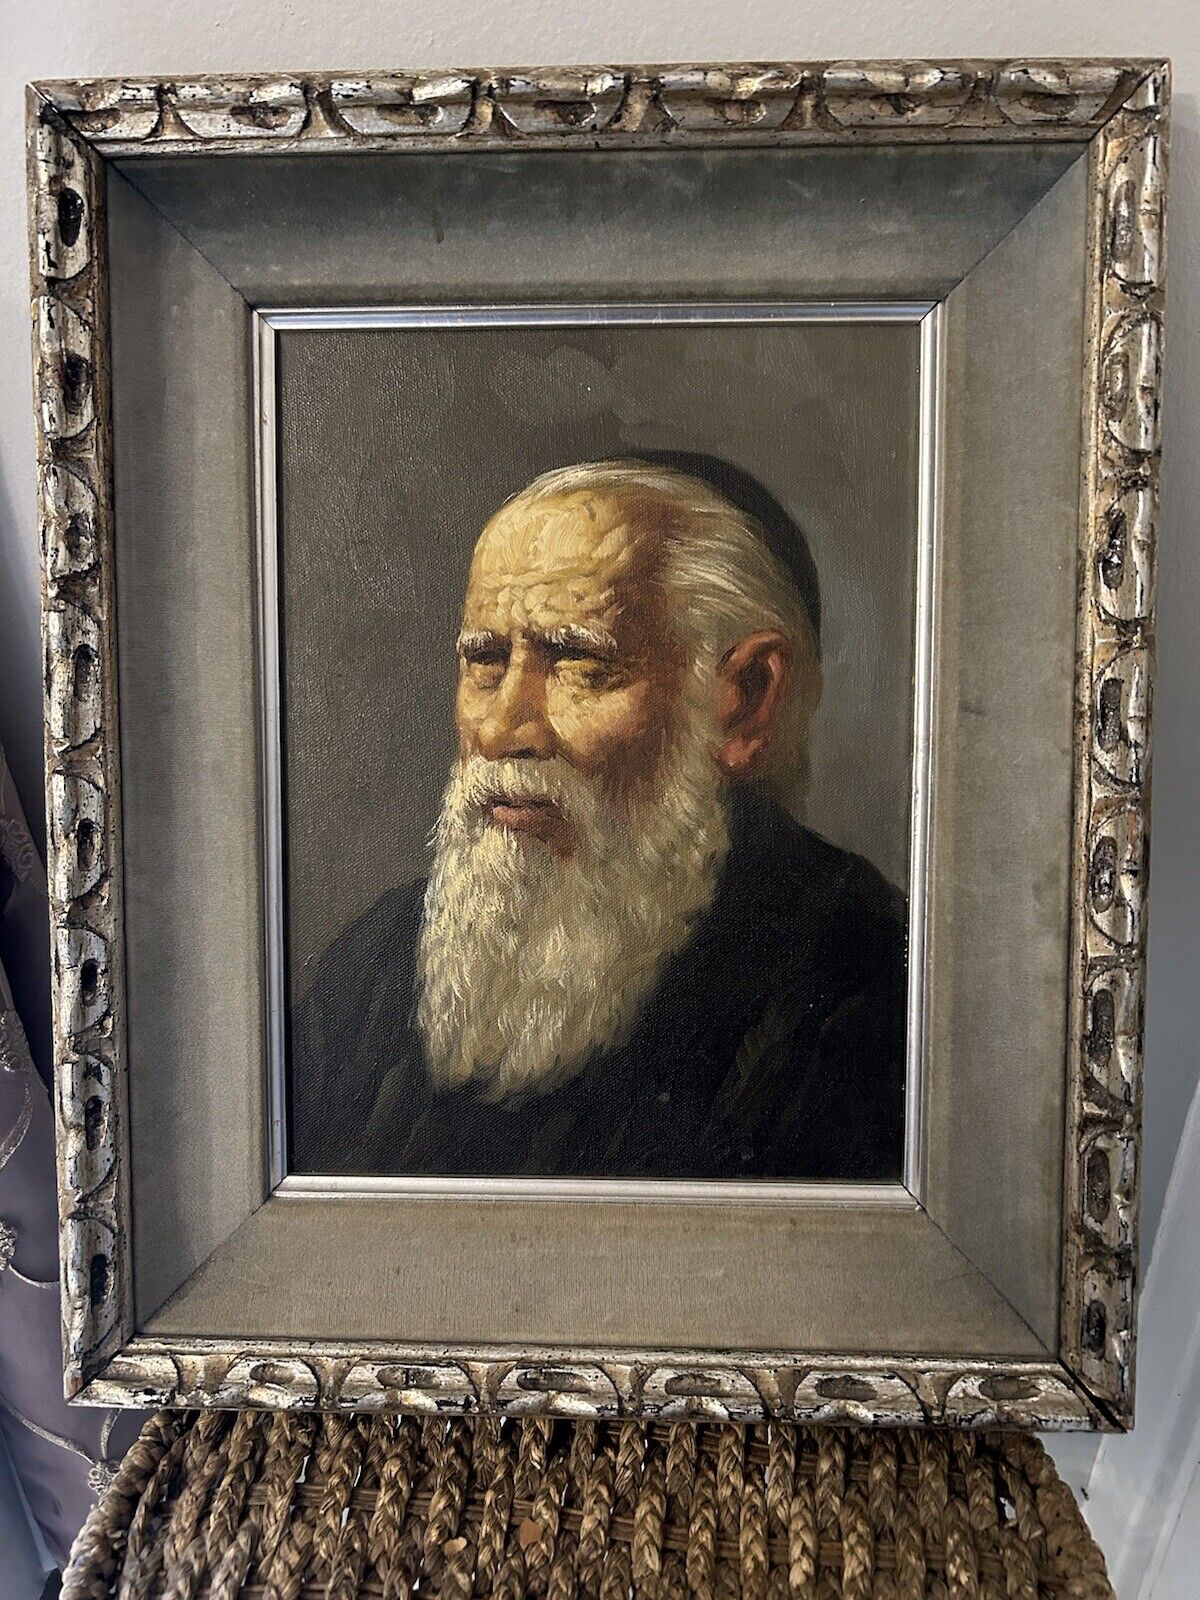 ANTIQUE OLD MASTER THE BLIND RABBI PORTRAIT OIL PAINTING SIGNED